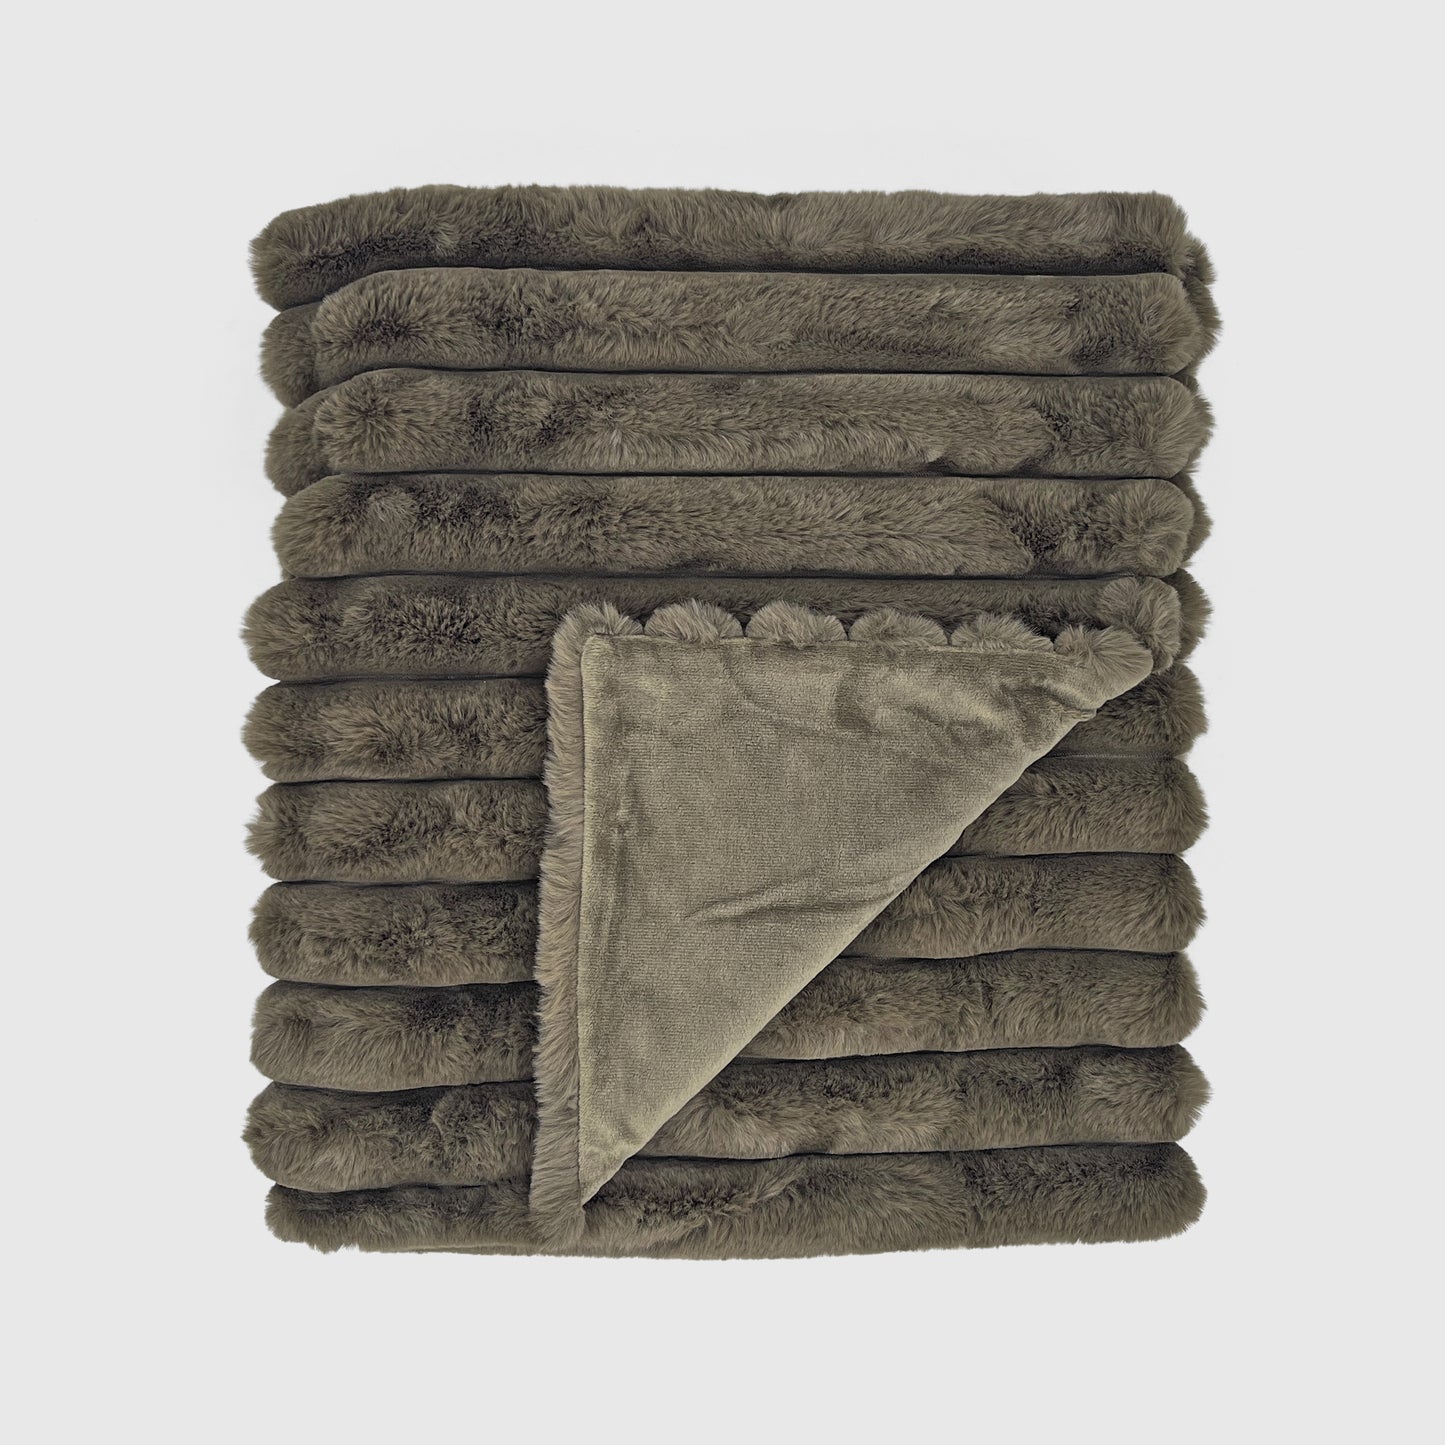 The Mood Puffy Faux Fur Throw, 50x60 in. Olive (Brown-Green)